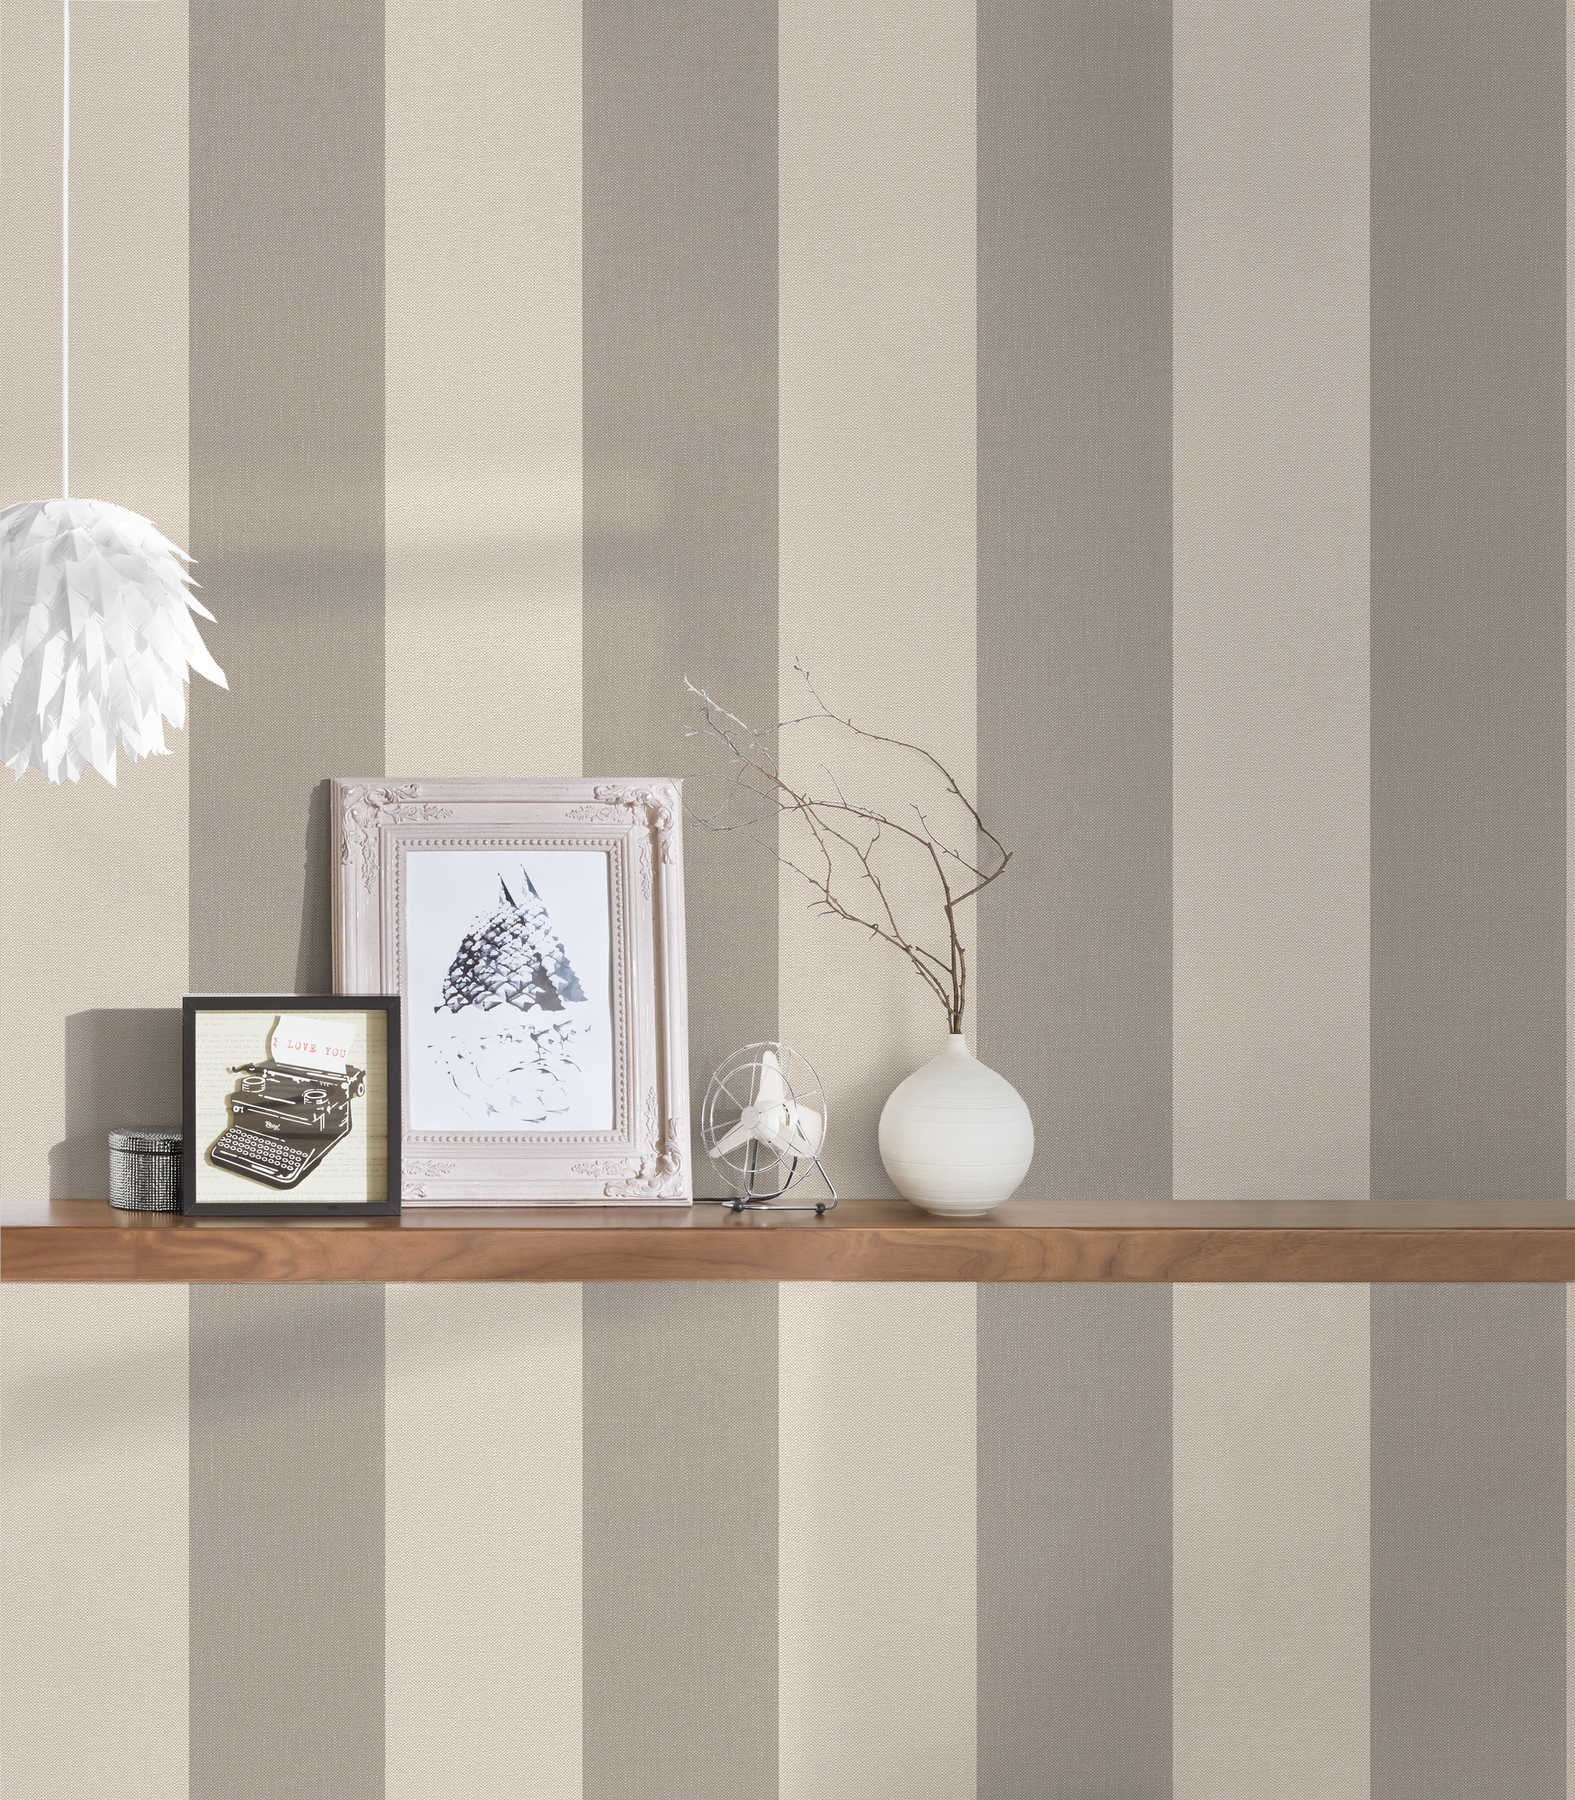             Block stripes wallpaper with textile look - beige, brown
        